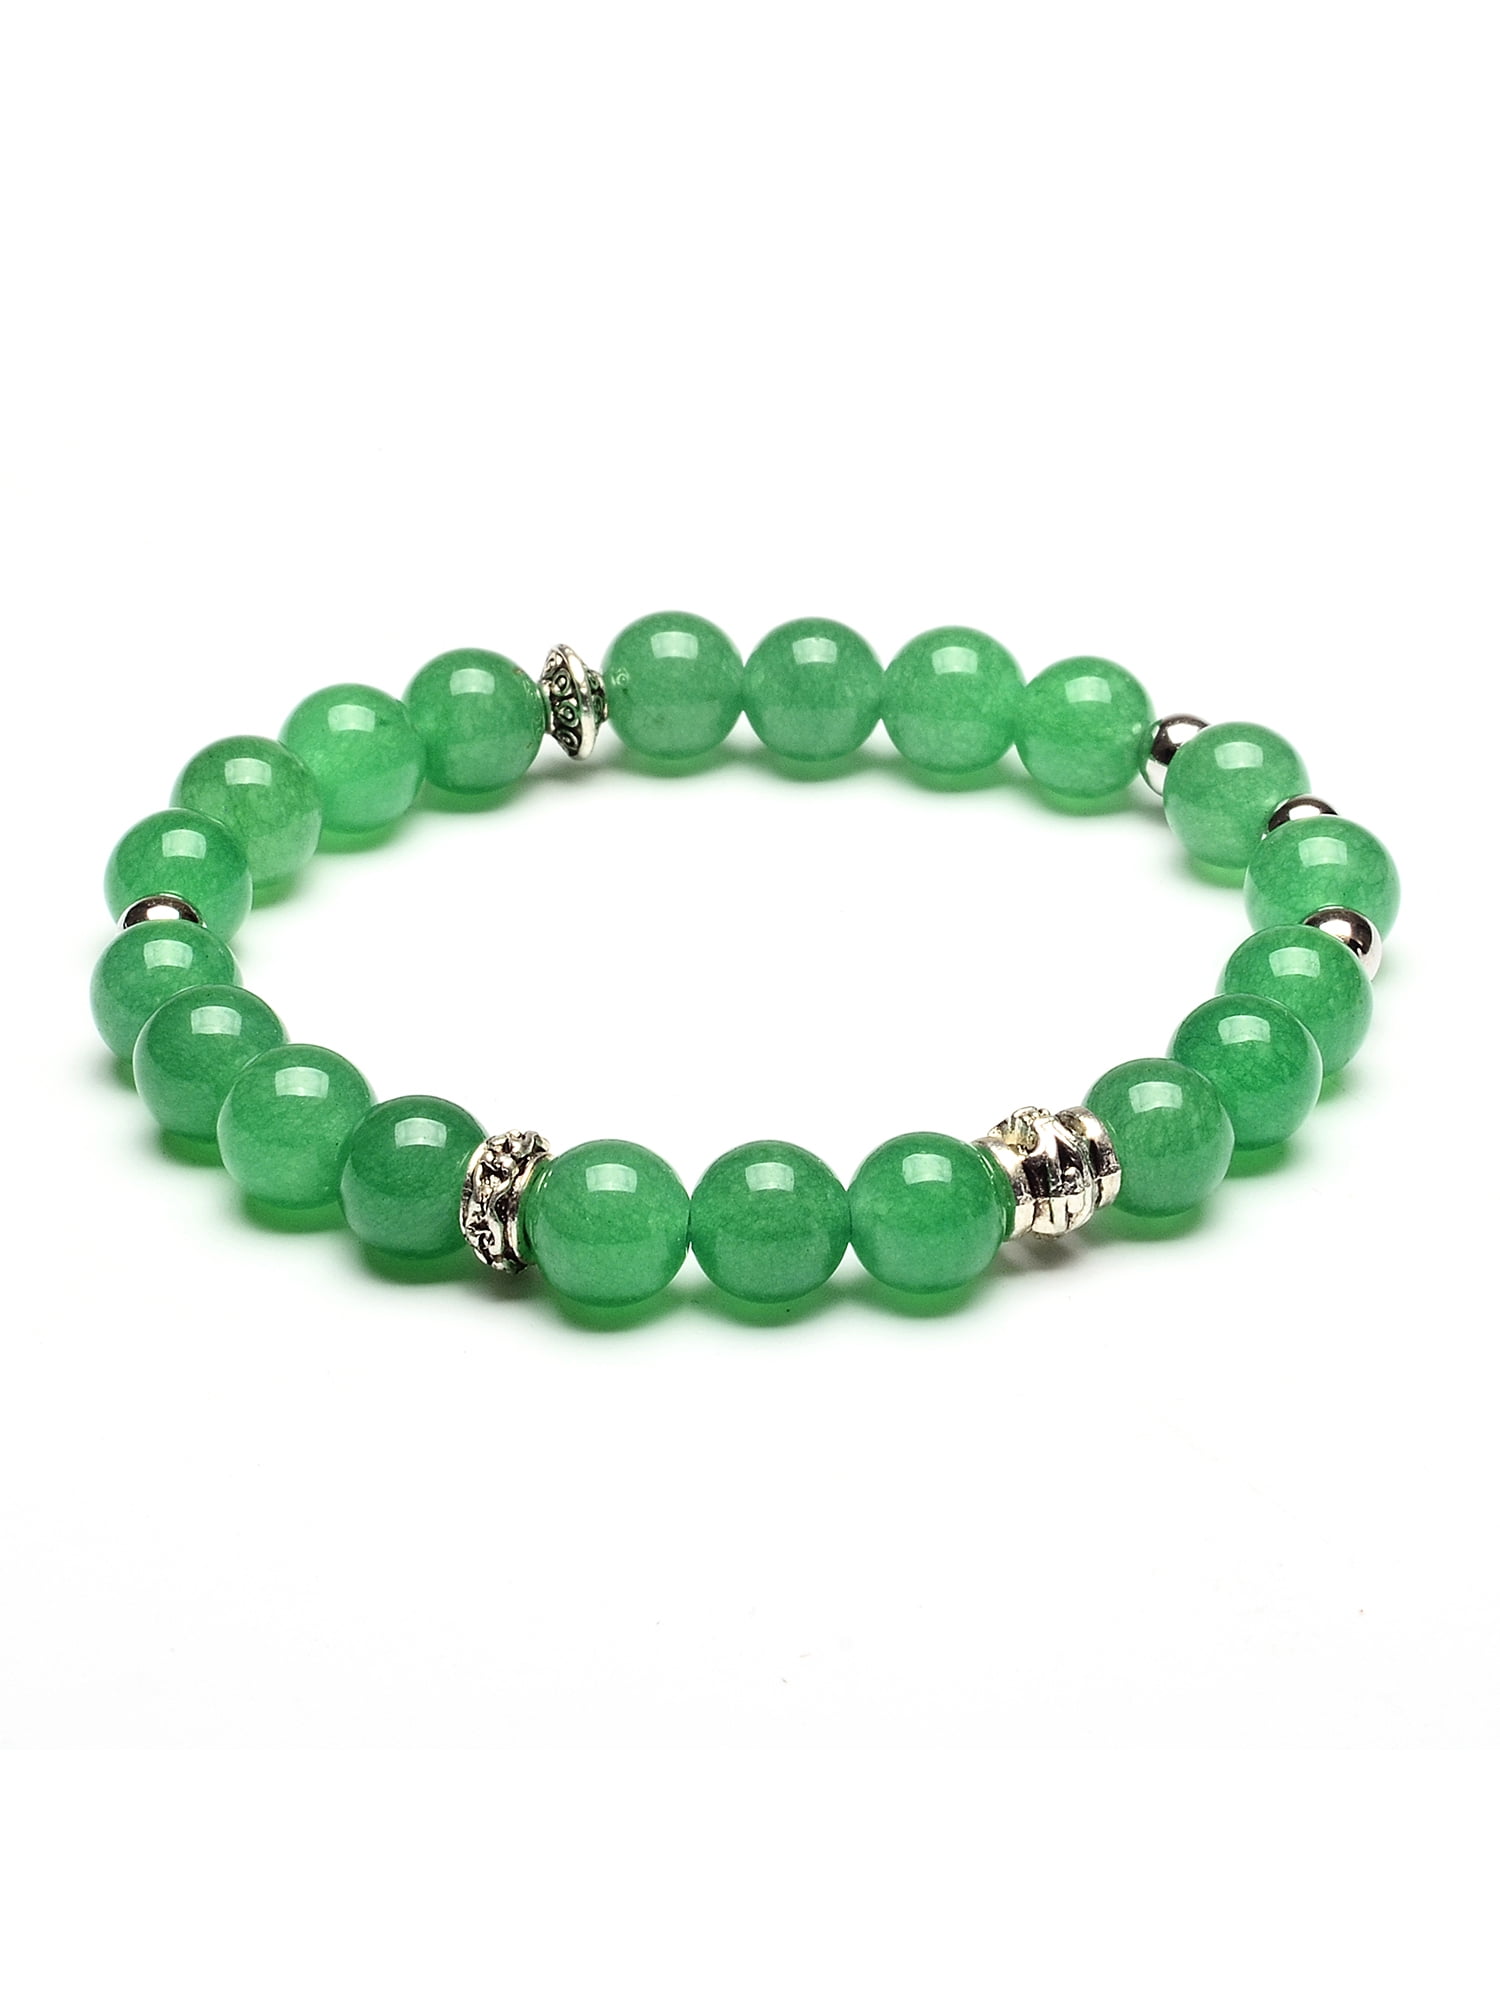 High Quality Natural Green Gemstone Beaded Stretch Unisex Bracelet Energy and Clarity FORZIANI 8mm Green Jade Bead Bracelet Men Women Made in USA Adjustable Size